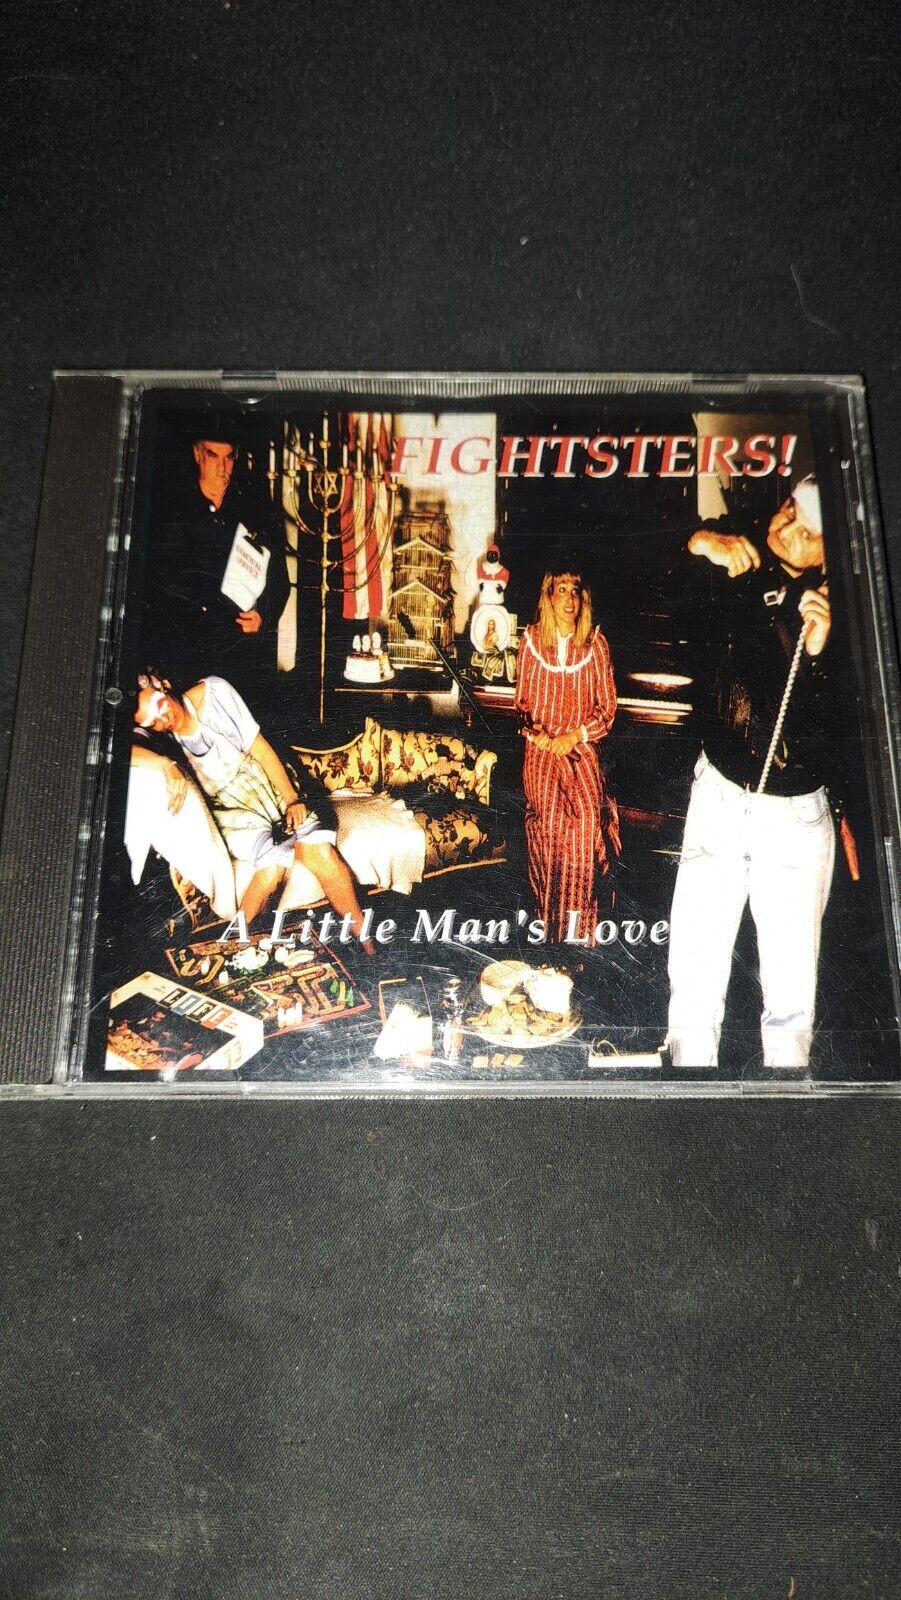 EXTREMELY RARE - HTF - OOP Fightsters A Little Man's Love (CD, Undated)